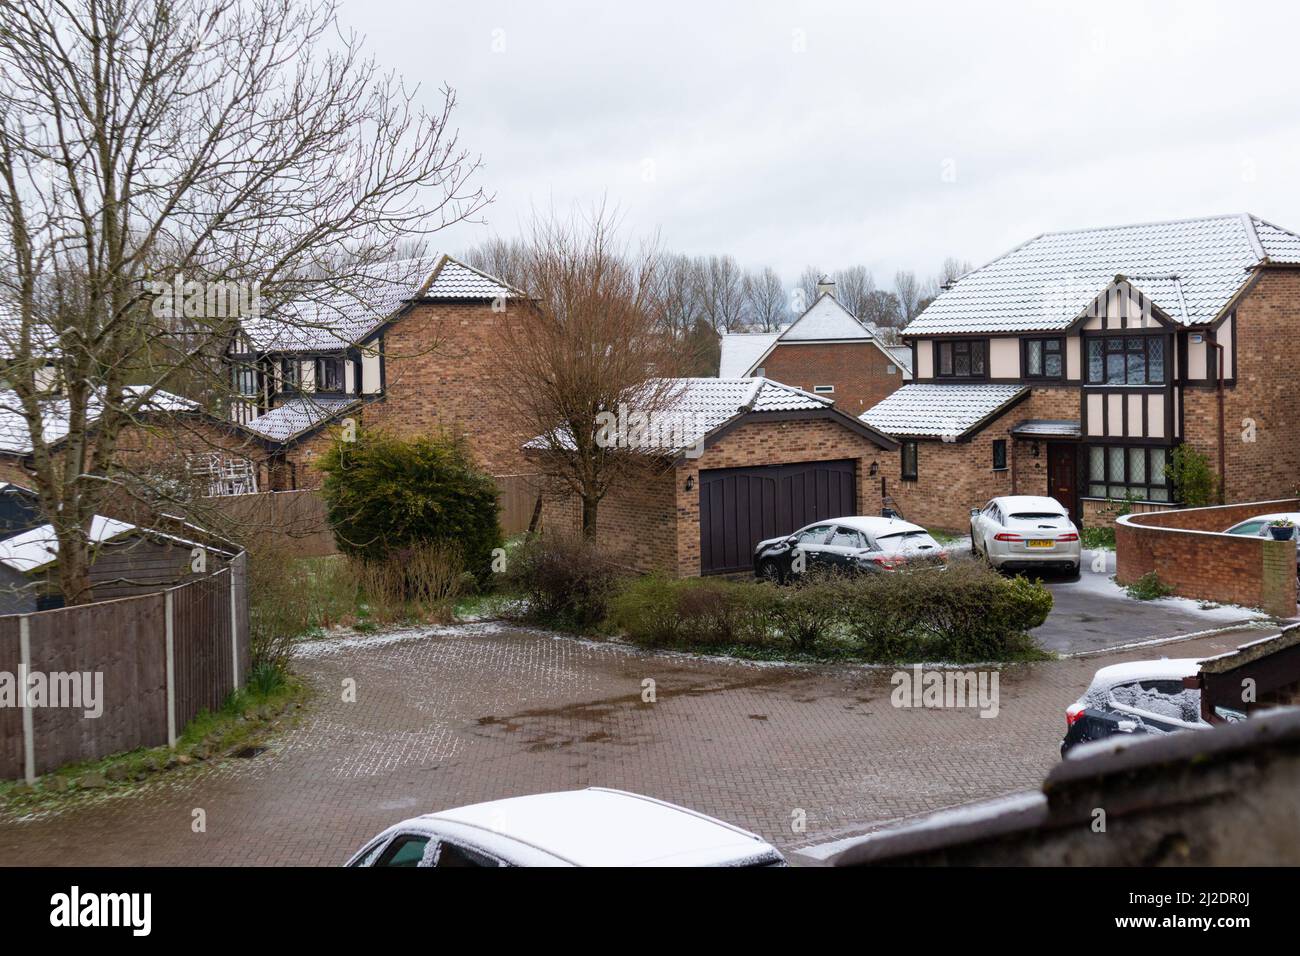 Ashford, Kent, UK. 1st Apr, 2022. UK Weather: Snow has settled overnight in these hamstreet village gardens on the outskirts of Ashford in Kent. Photo Credit: Paul Lawrenson/Alamy Live News Stock Photo